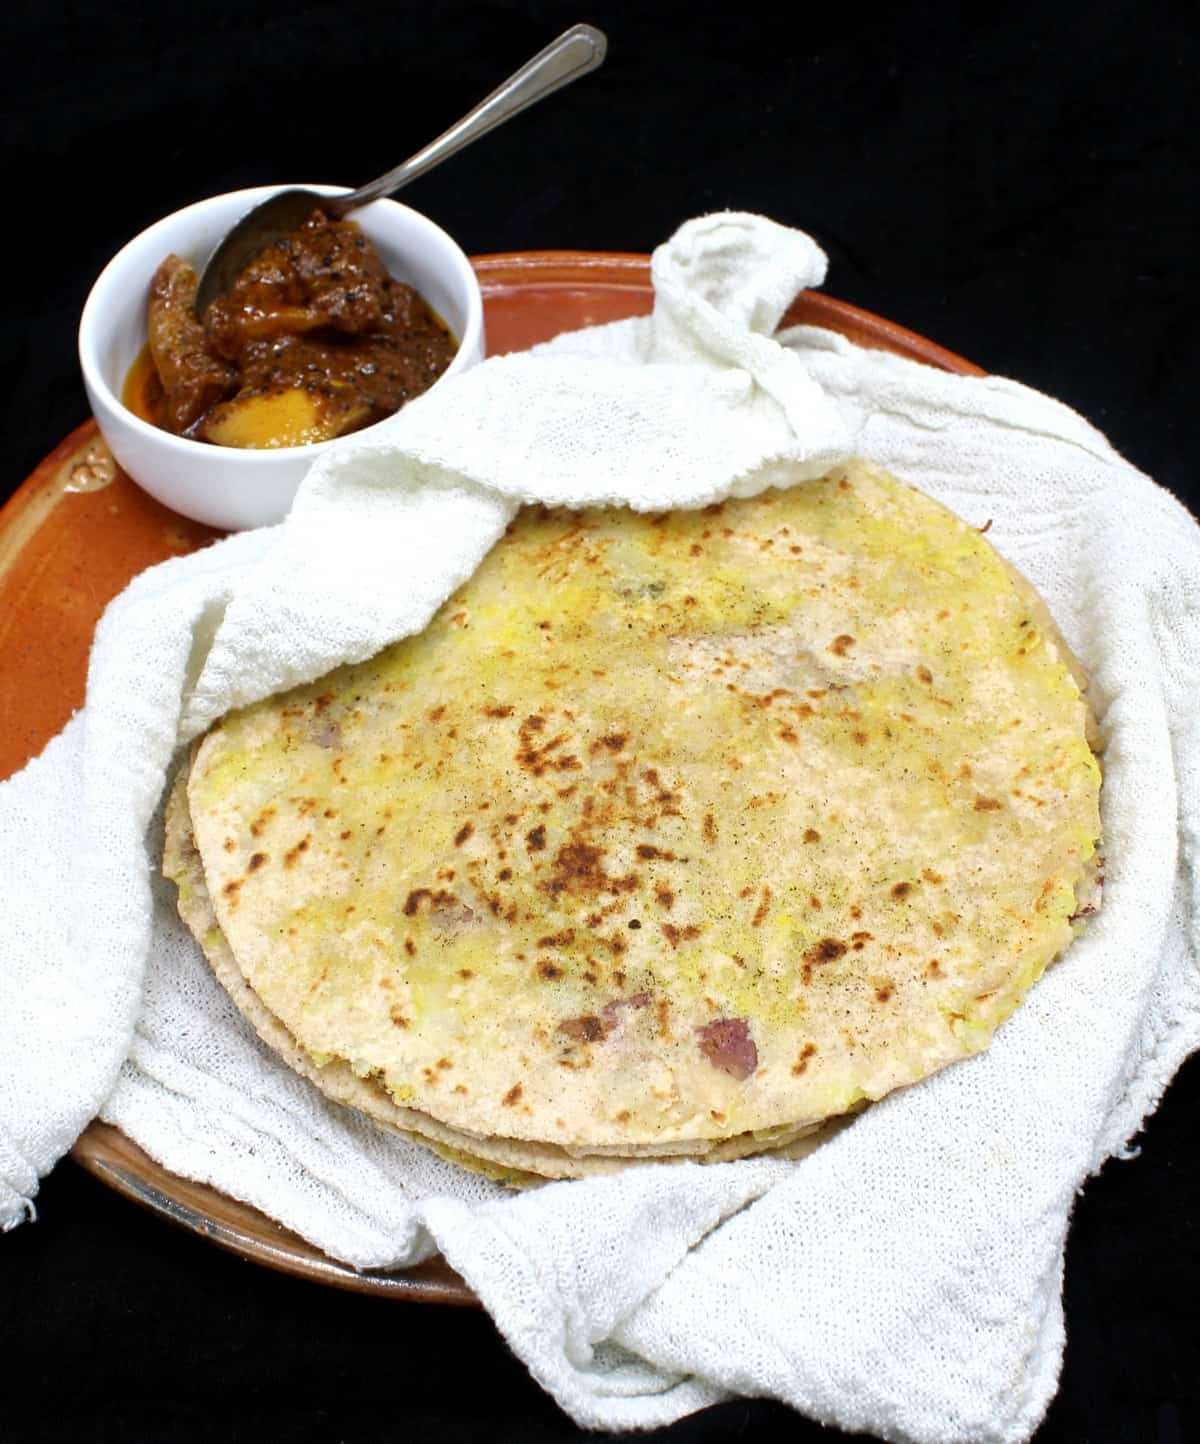 A front shot of a stack of freshly baked aloo parathas nestled in a white flour sack towel on an earthenware plate with a small white ceramic bowl of Indian lime pickle on the side, all on a black background.